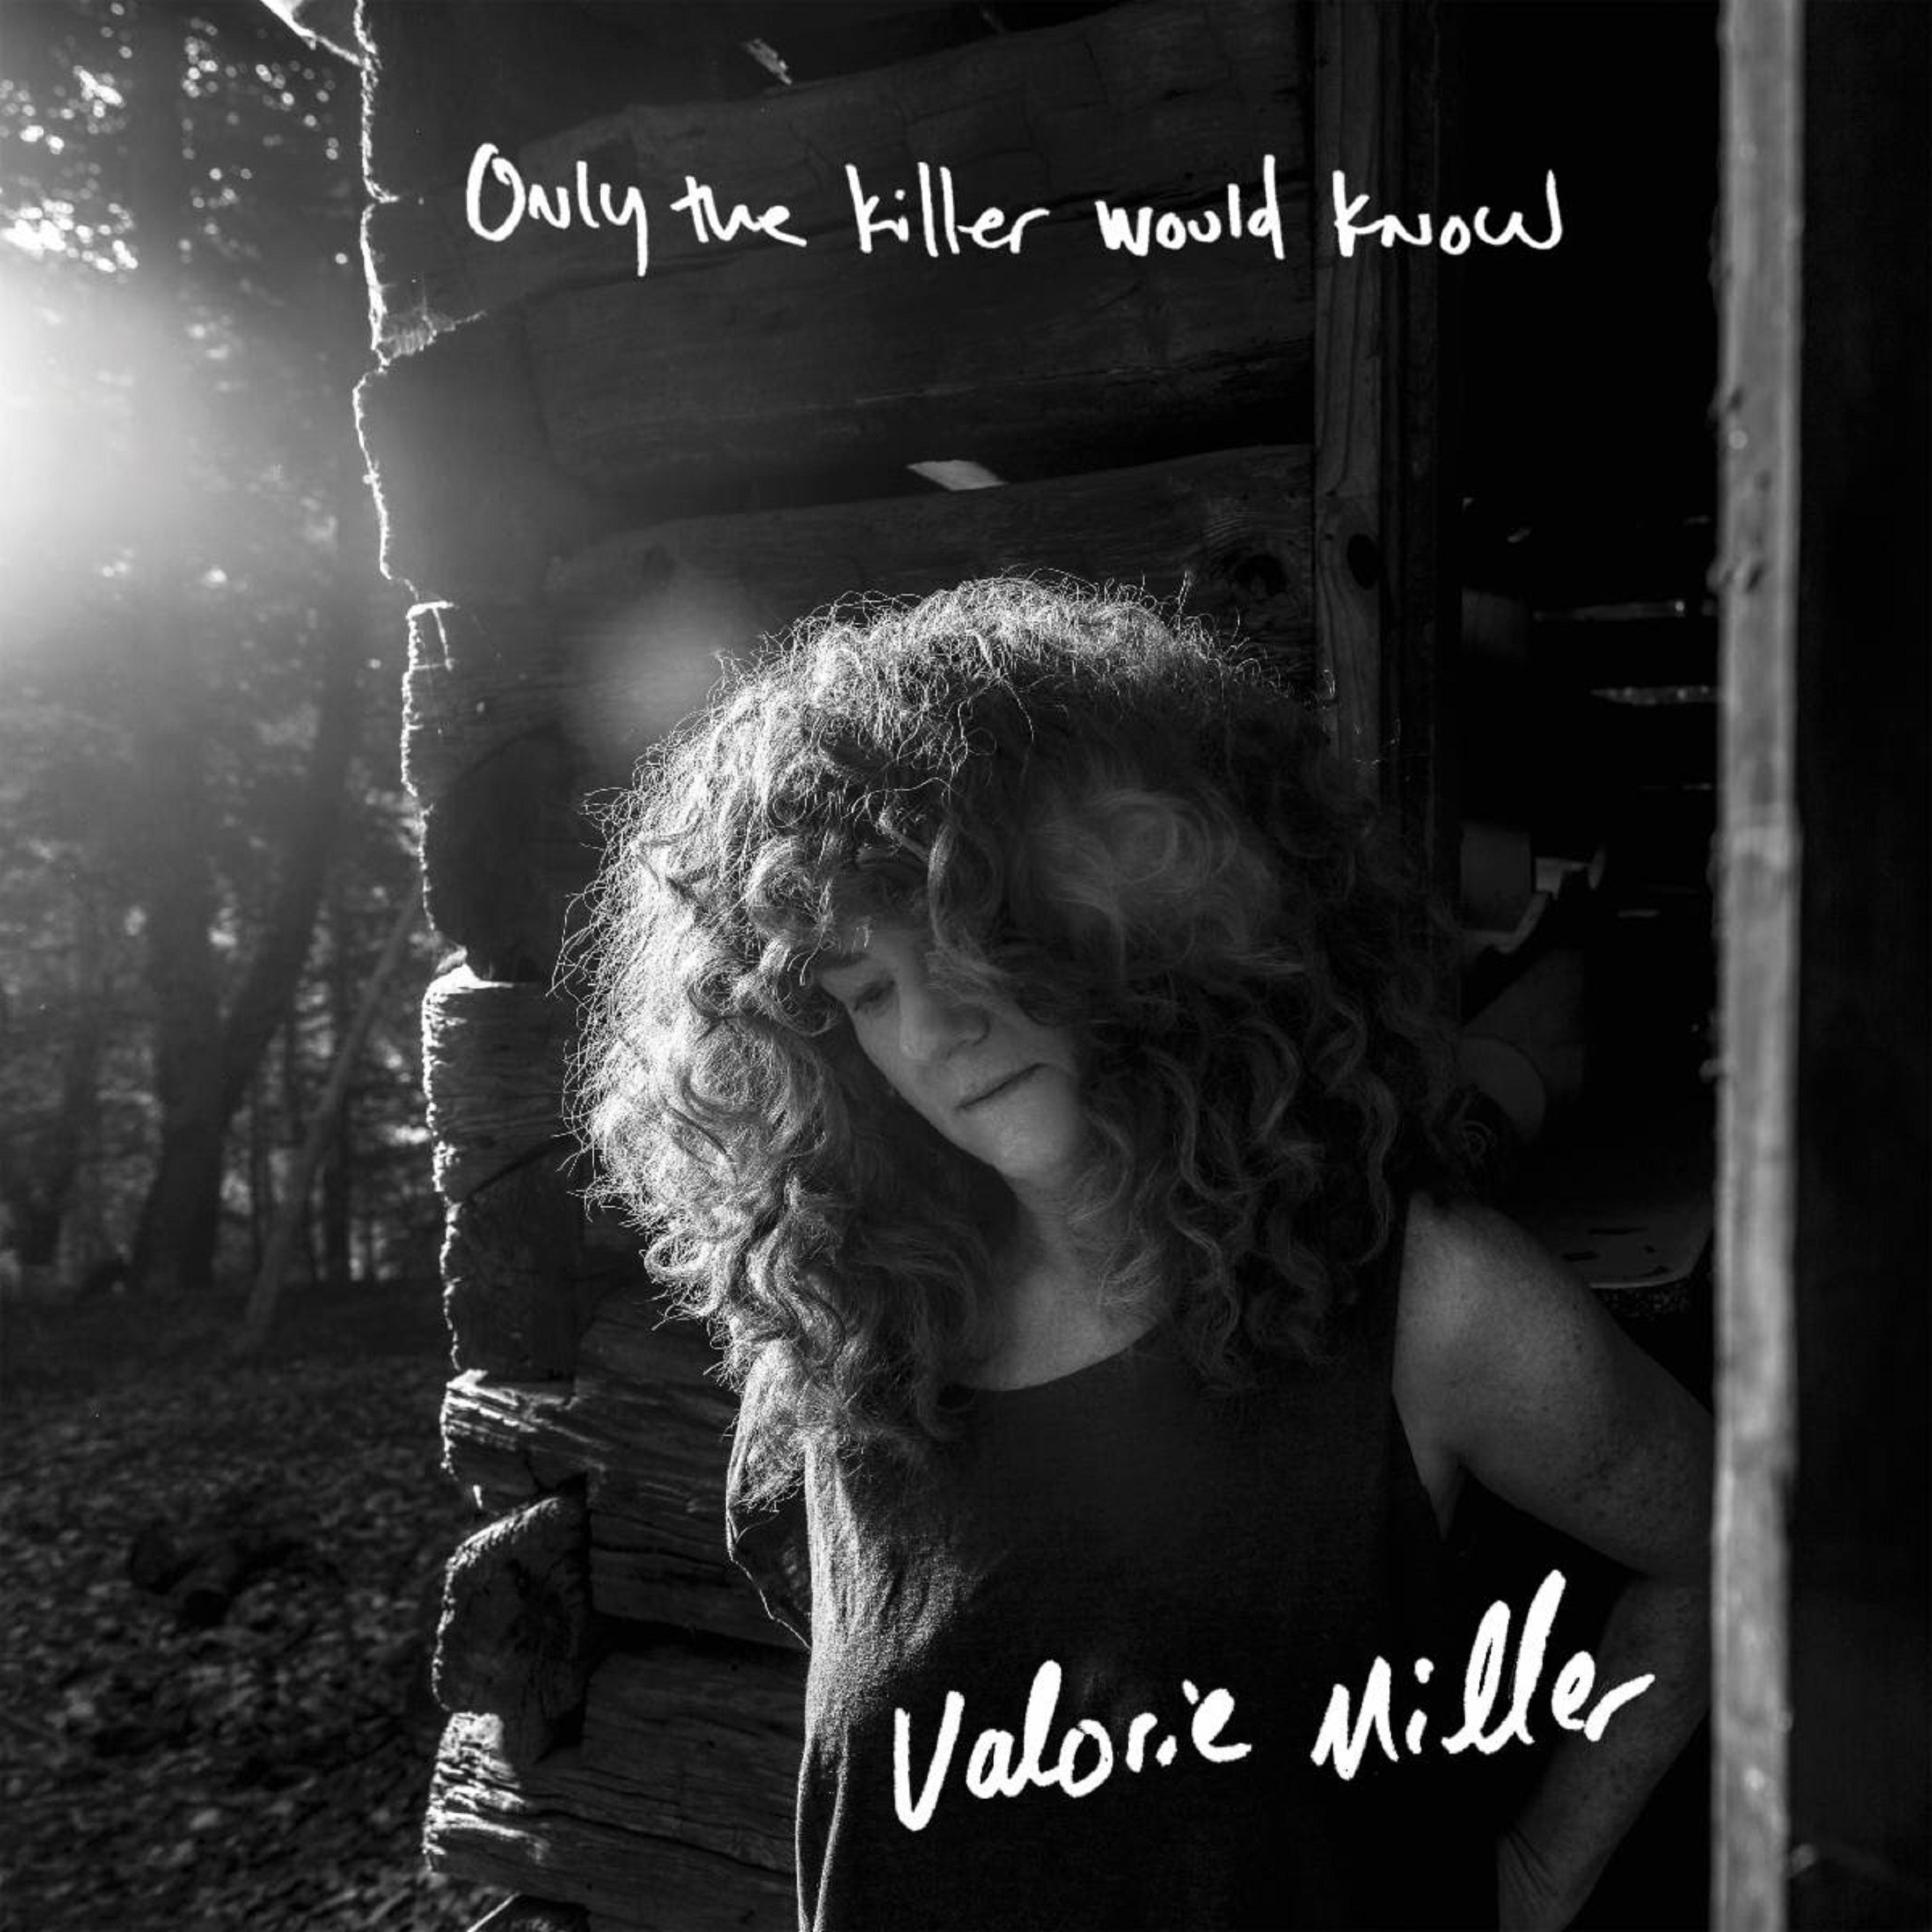 VALORIE MILLER takes on an NC Superfund site with new video "Home of the Brave"